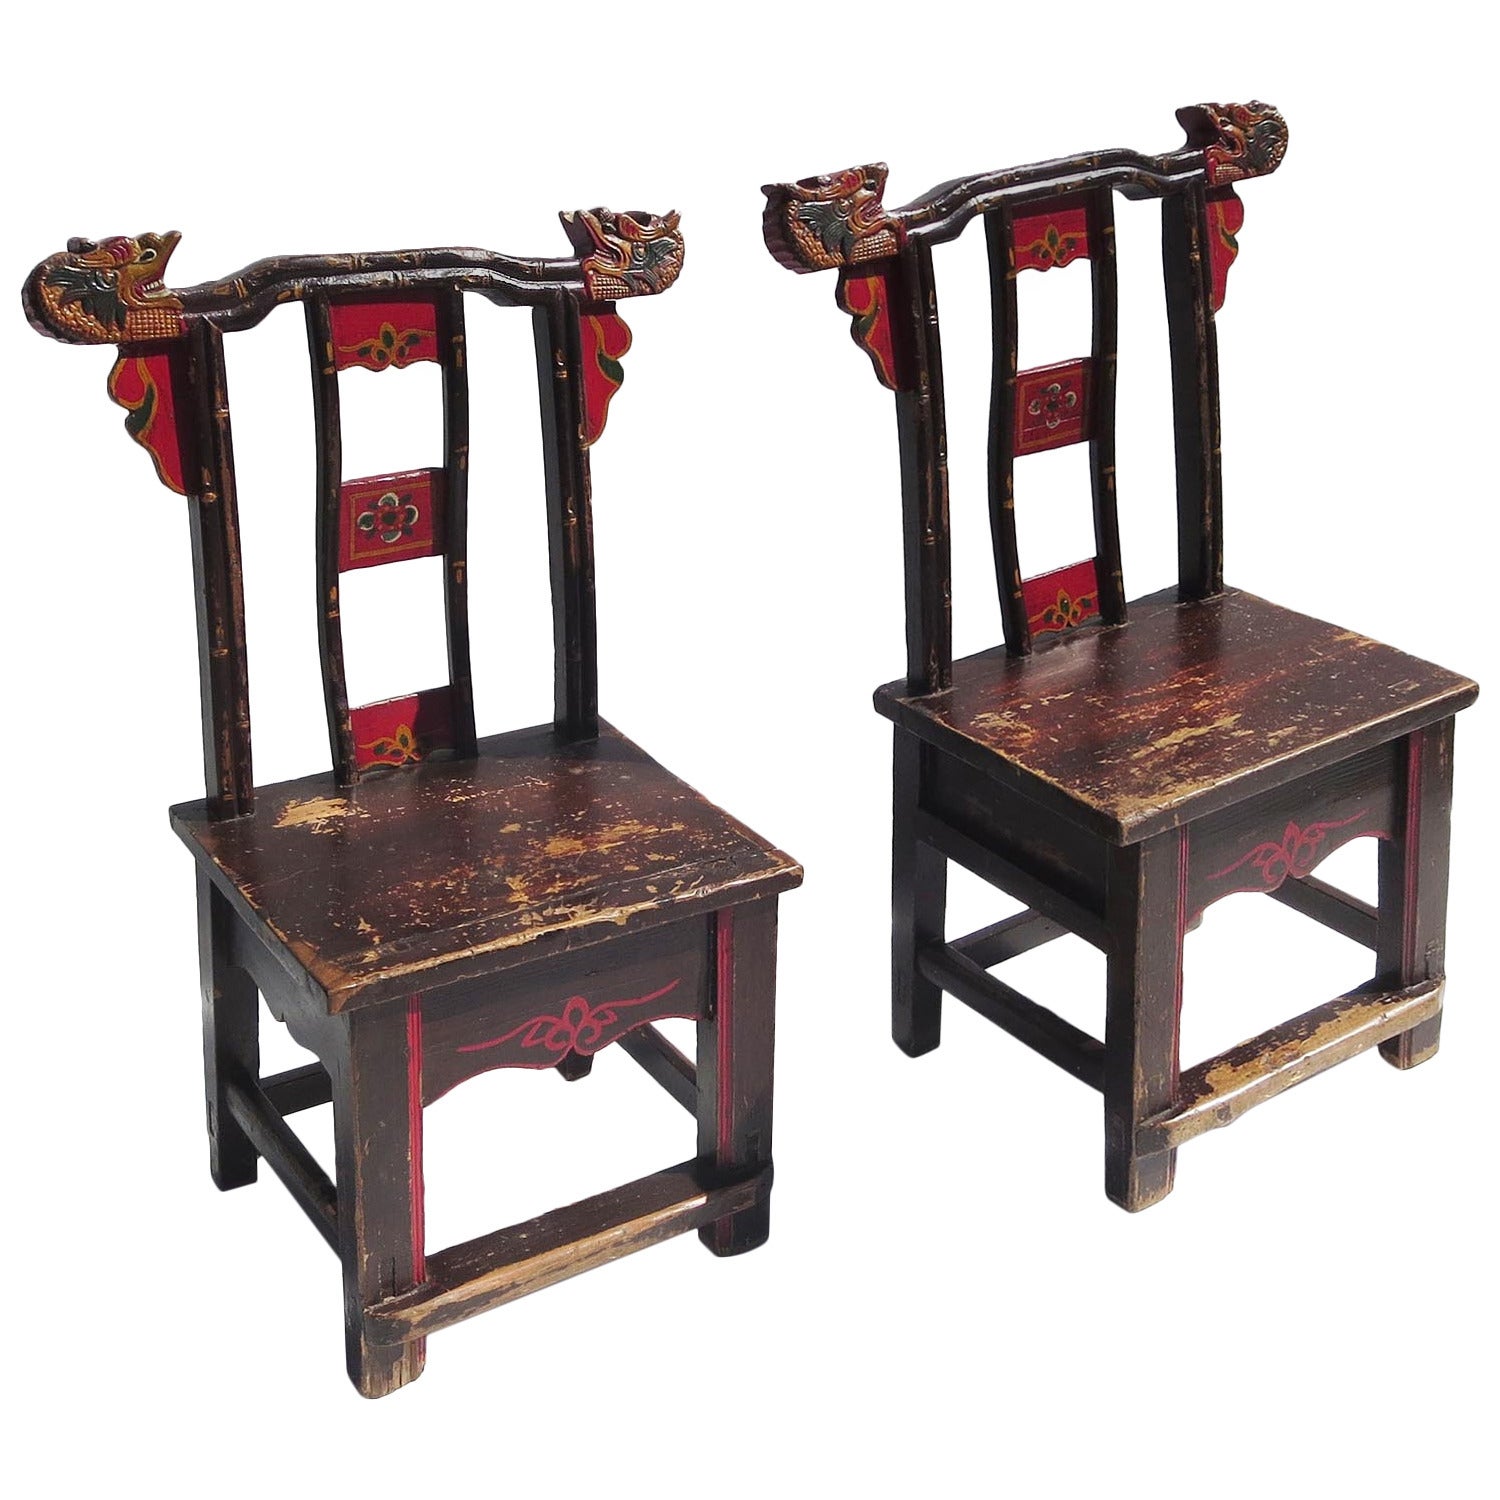 Charming Carved and Painted Asian Dragon Chairs For Sale